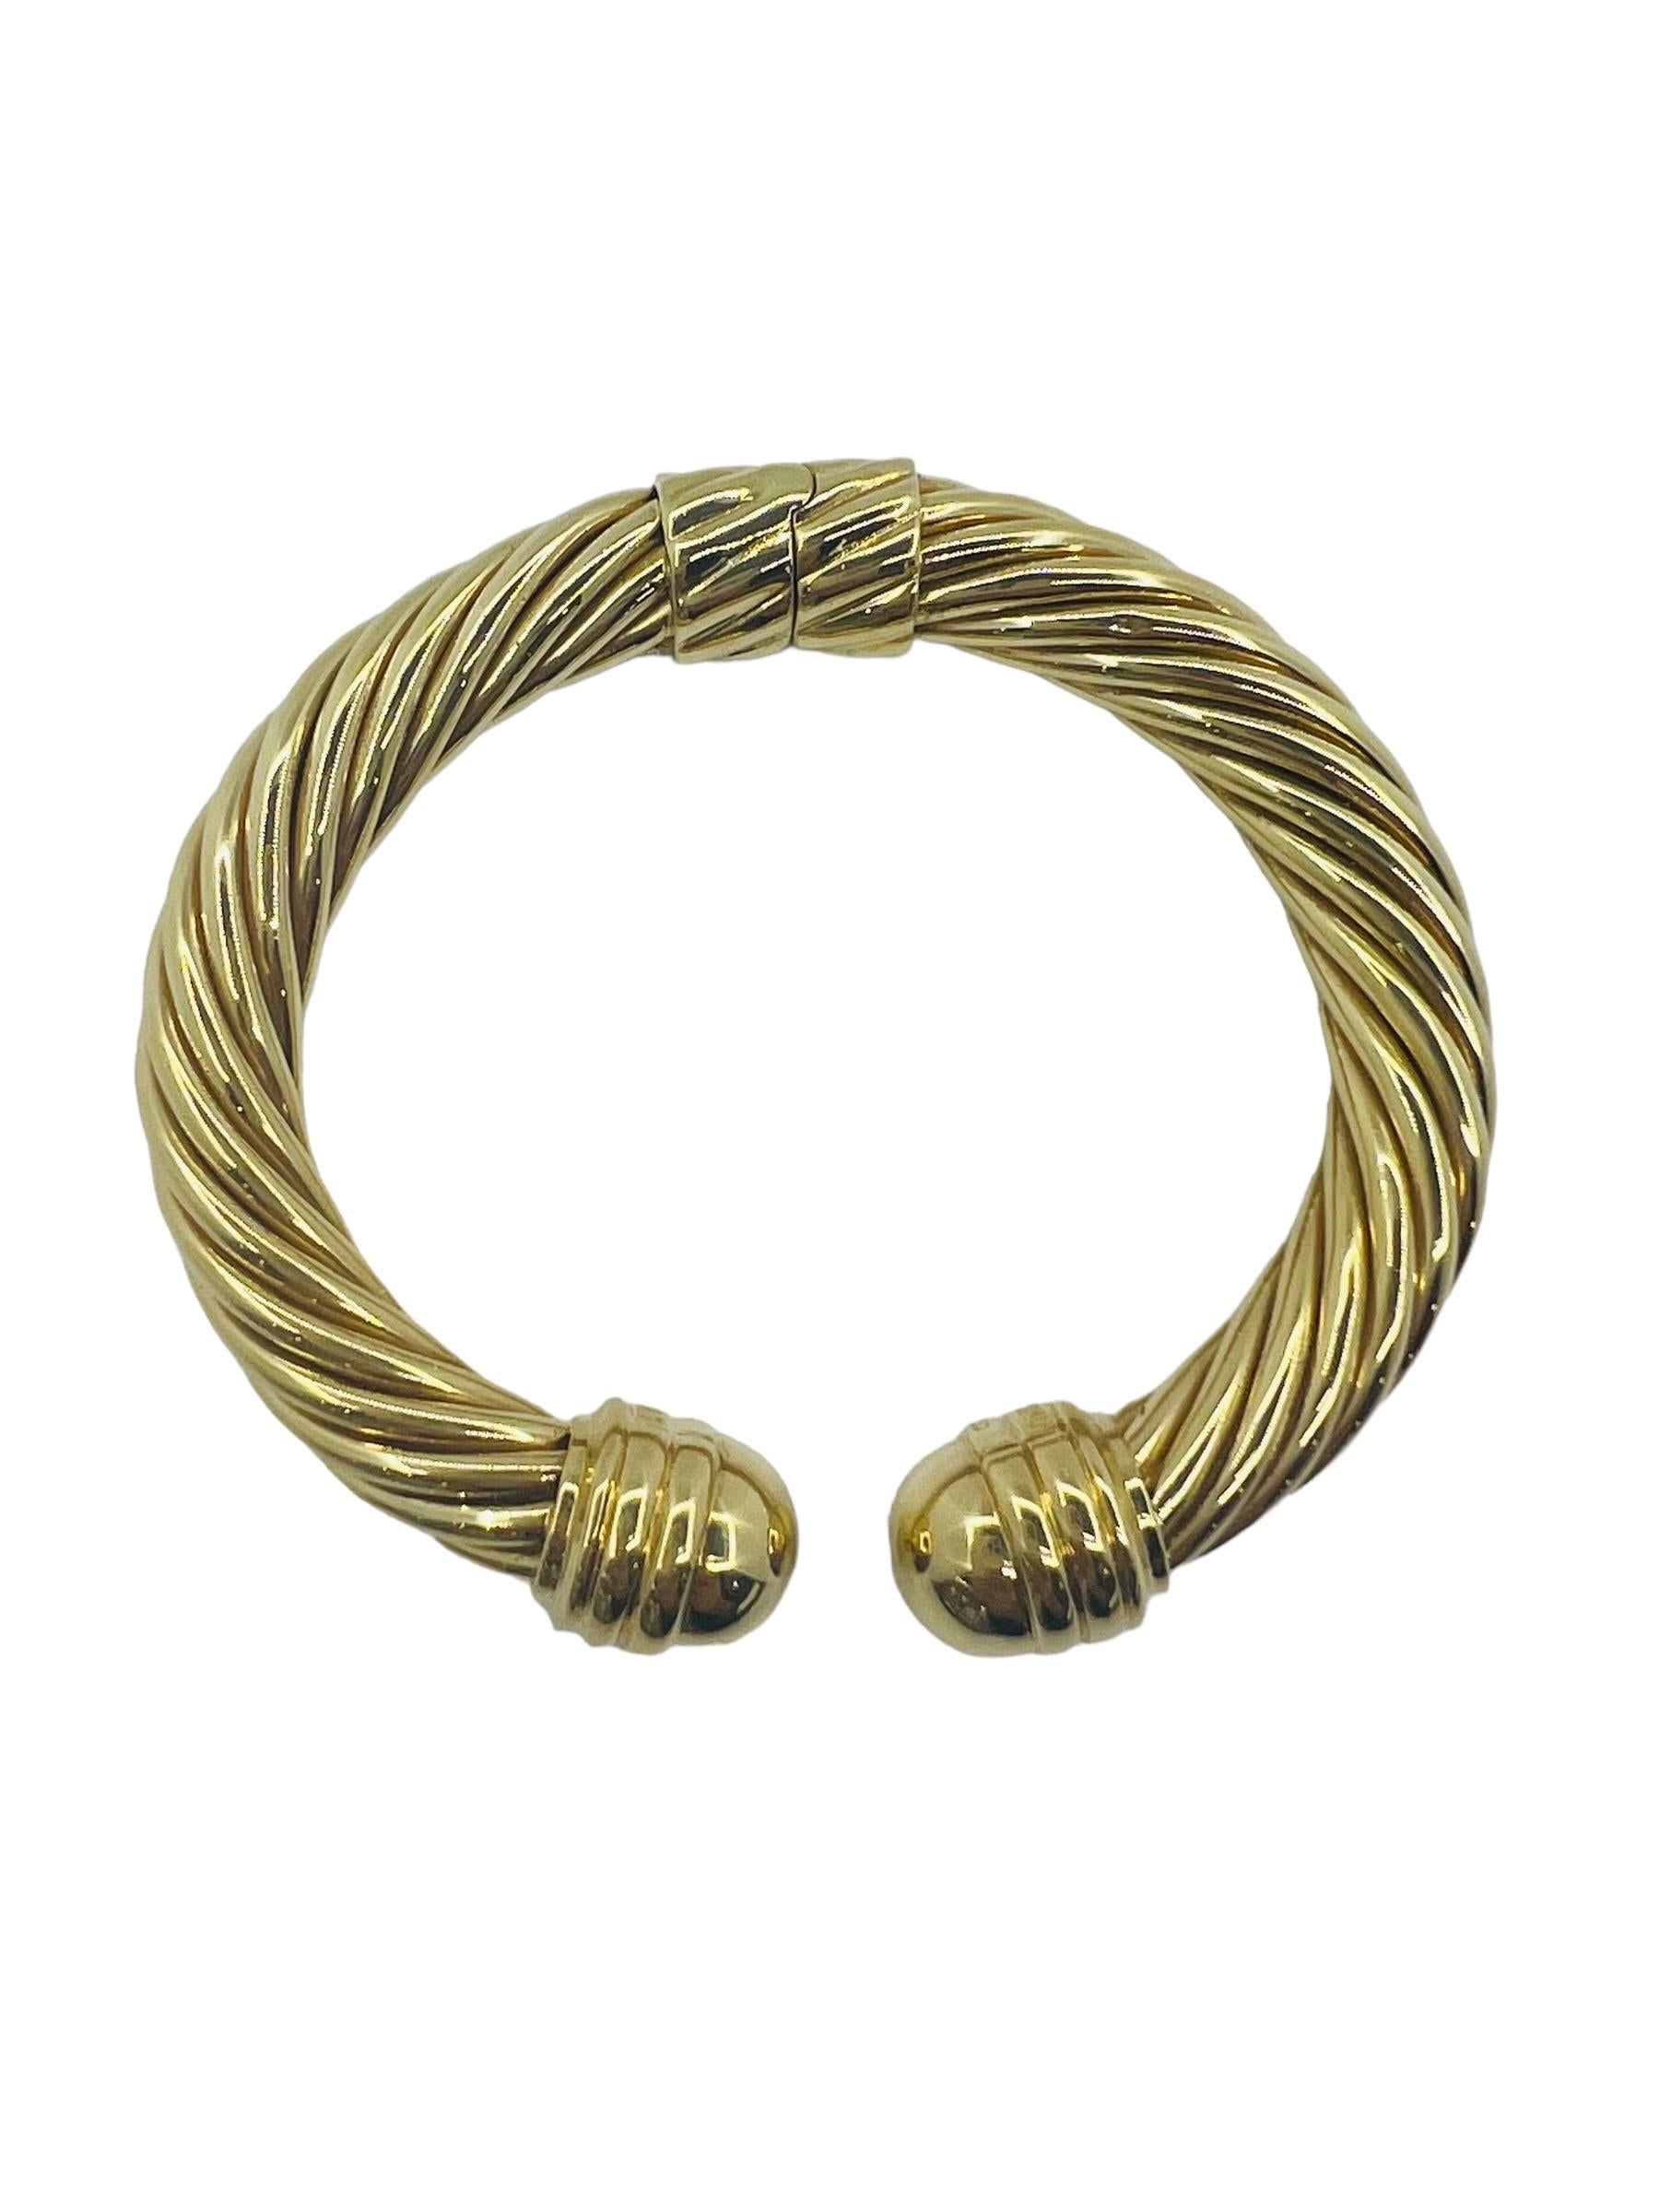 Like New in Excellent Condition. David Yurman cable collection. 18k Yellow Gold. Size Medium. 6.5 inches 9mm Wide. Comes with Box. Retail is $8500